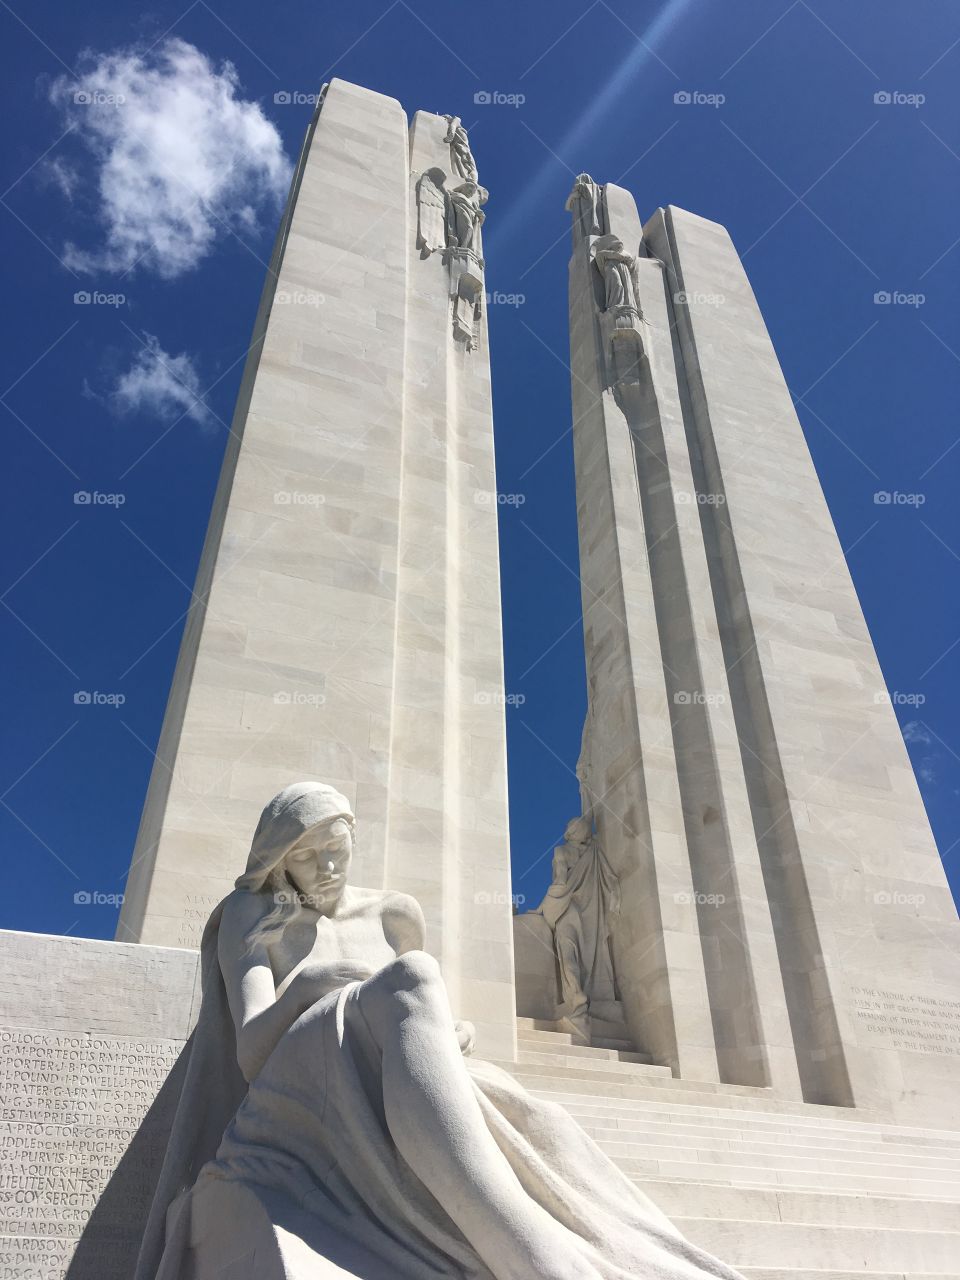 Canadian World War 1 monument, Vimy, France